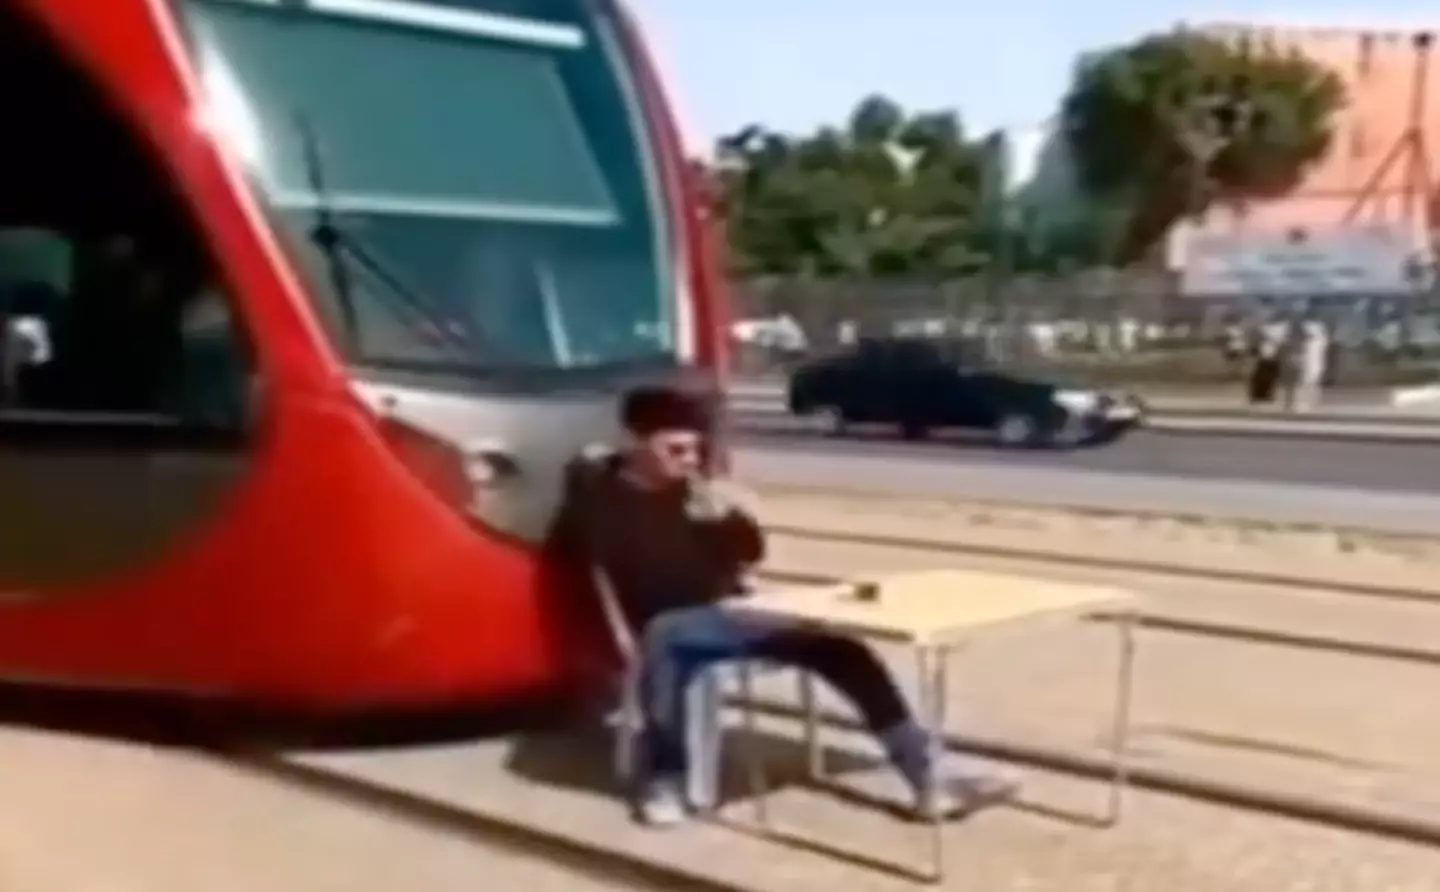 The tram was forced to come to a standstill (TikTok)